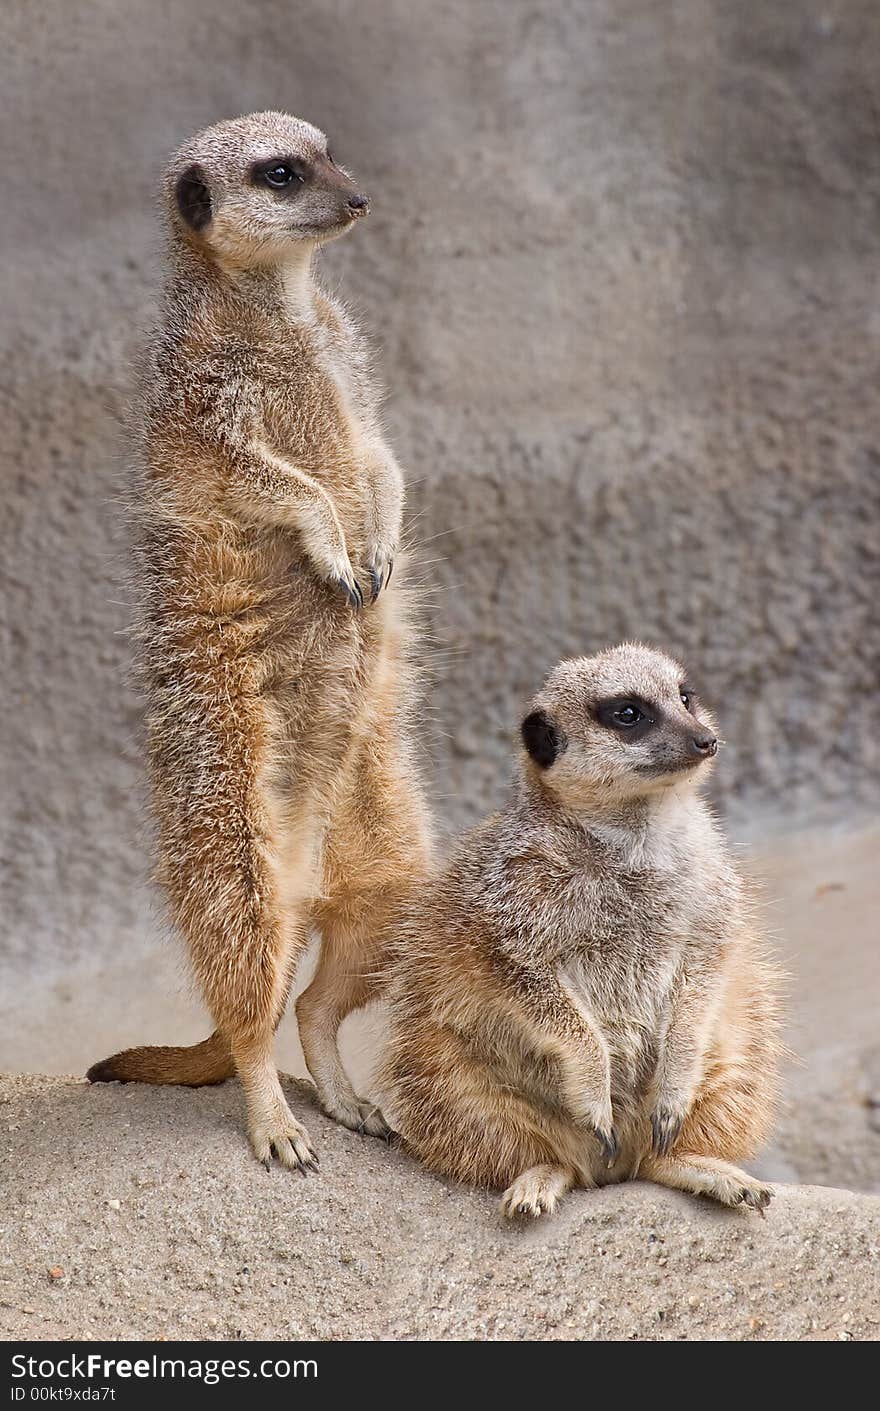 Two meerkats are keeping an eye out for danger.